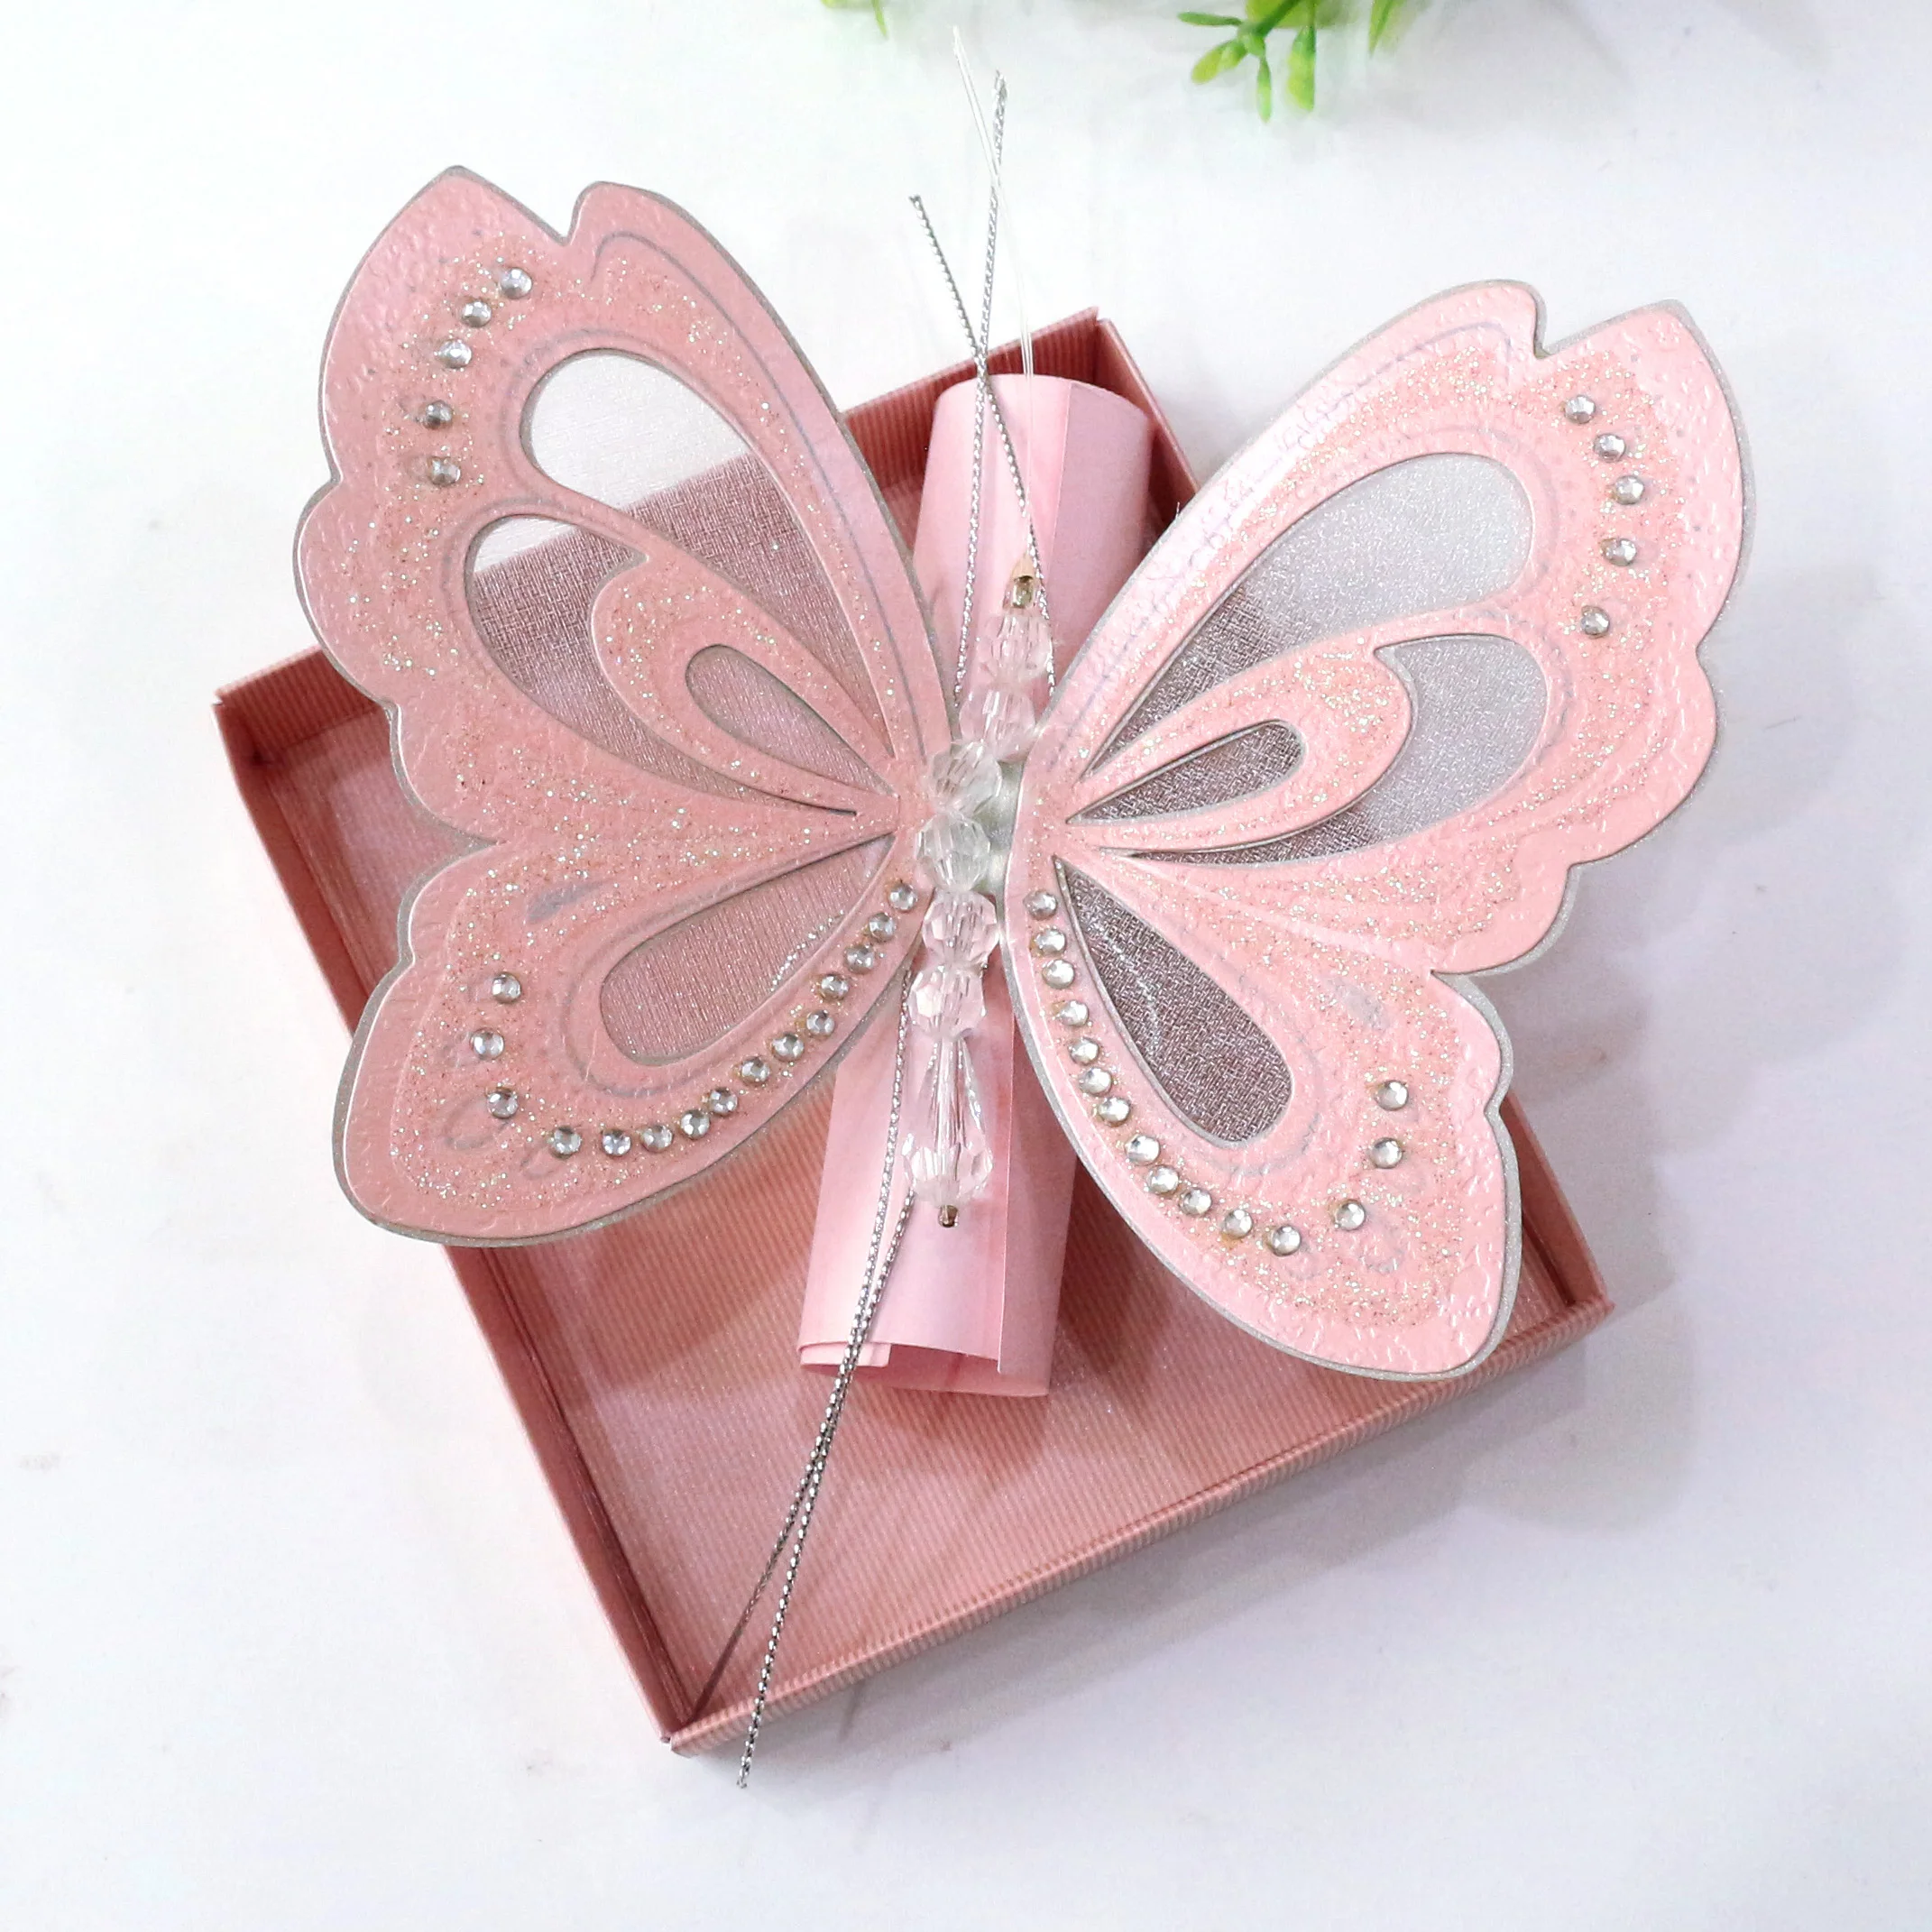 

Handmade Extravagant 3D Butterfly Scroll Wedding Invitations with A Box and custom box design birthday invitation cards